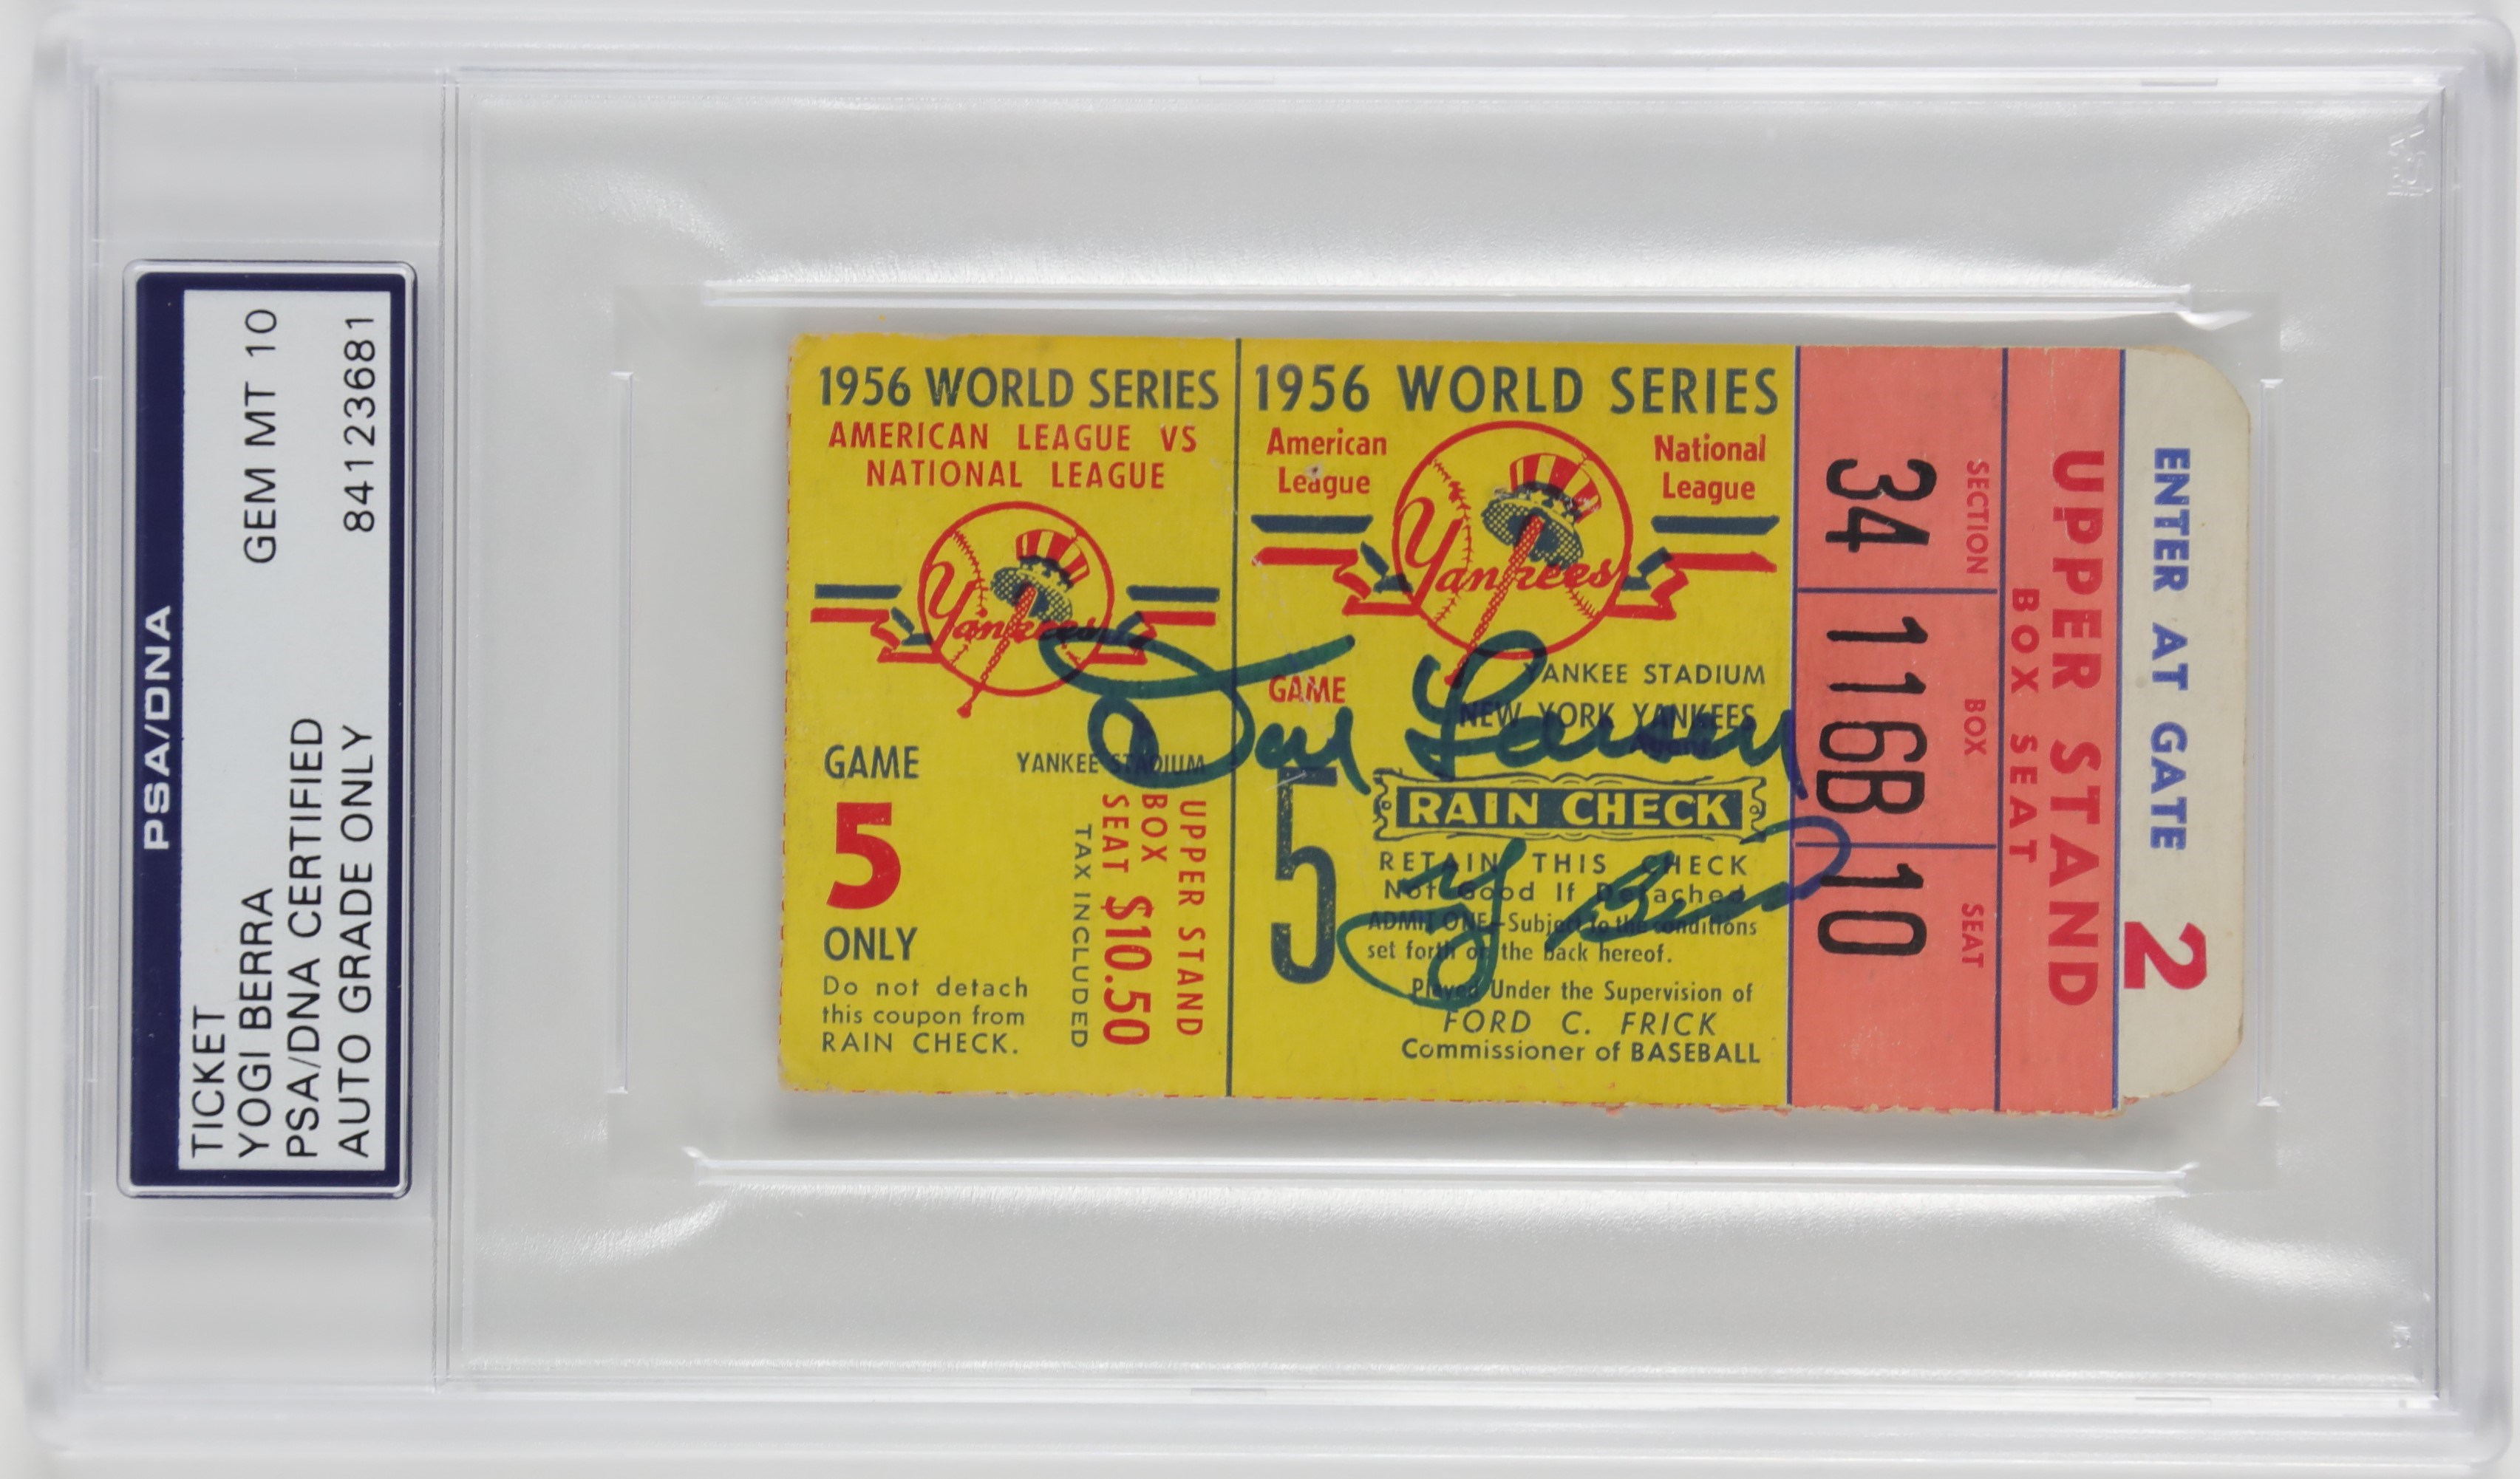 1956 World Series Perfect Game Ticket Signed by Berra & Larsen (PSA 10)